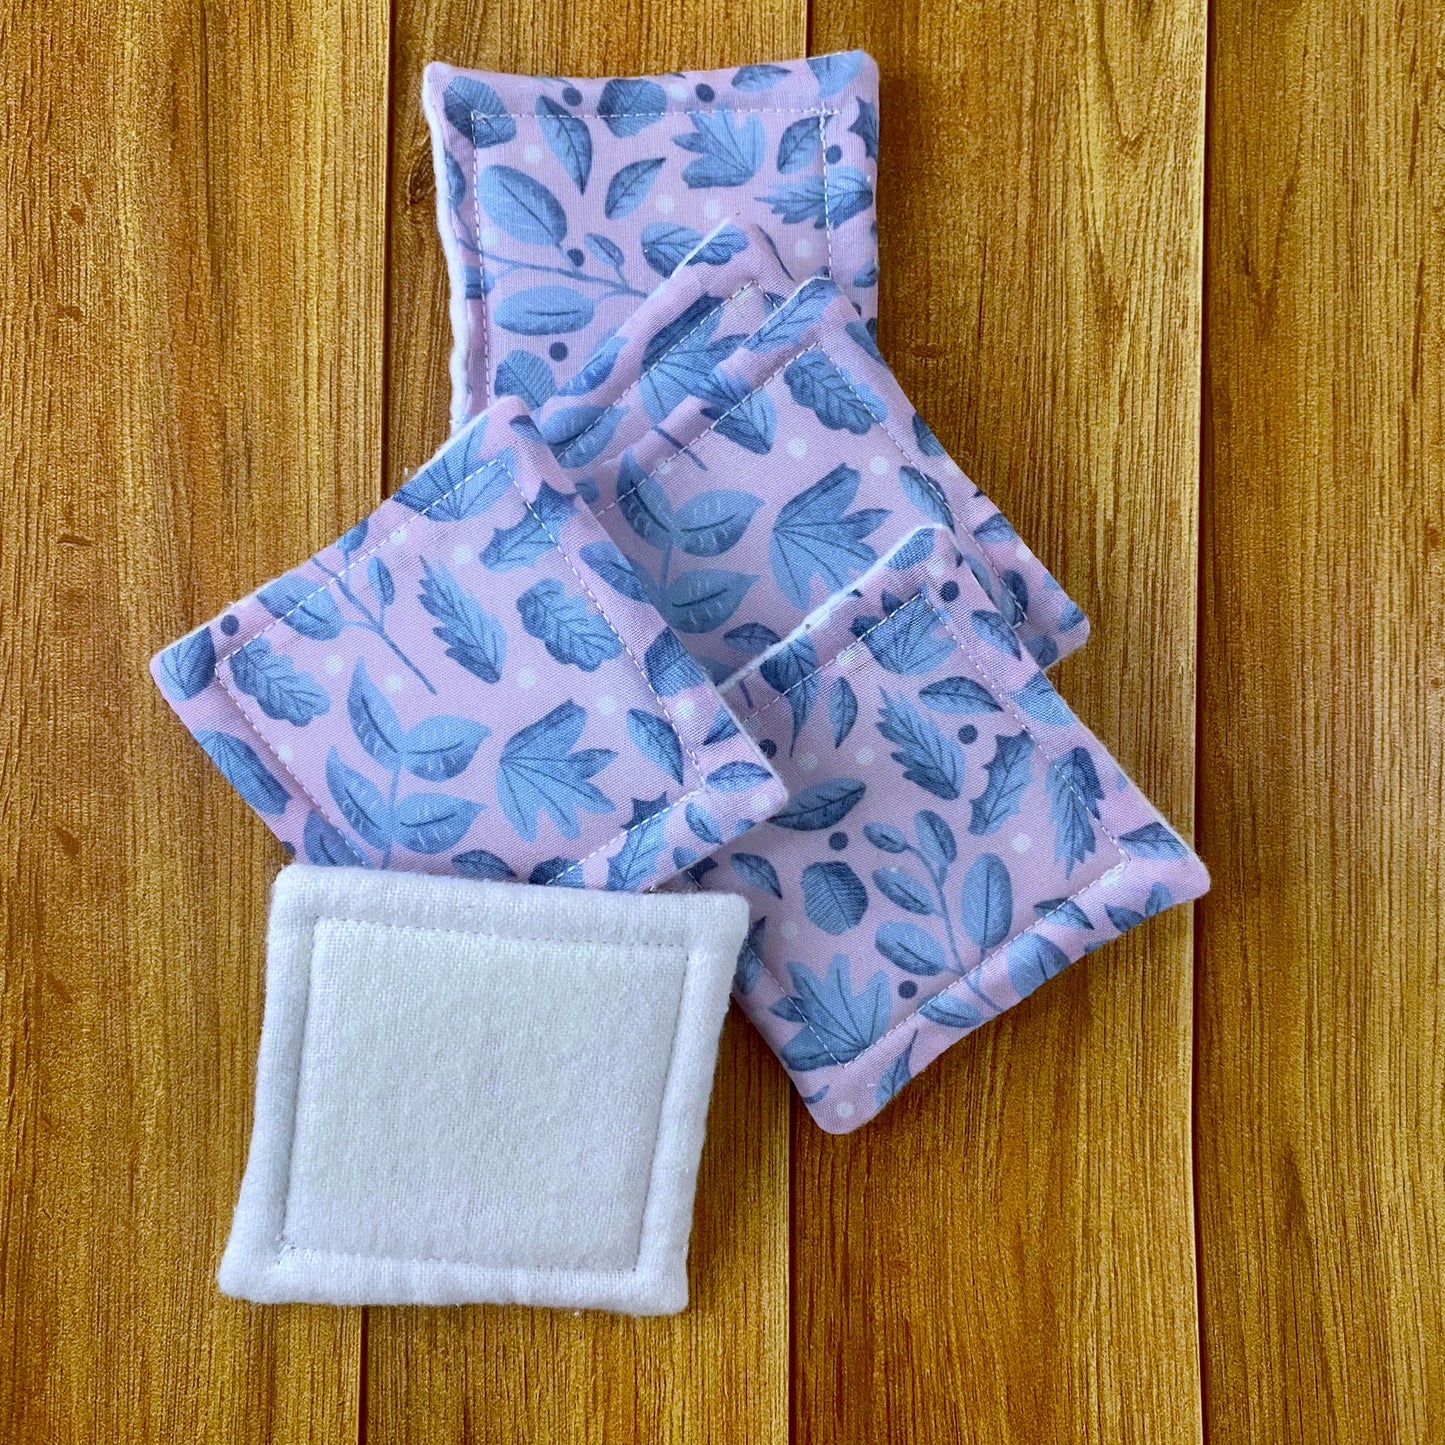 six reusable skincare pads in a pile showing the blue and pink foliage pattern on five and the white brushed cotton on the one at the front, all on a wooden background